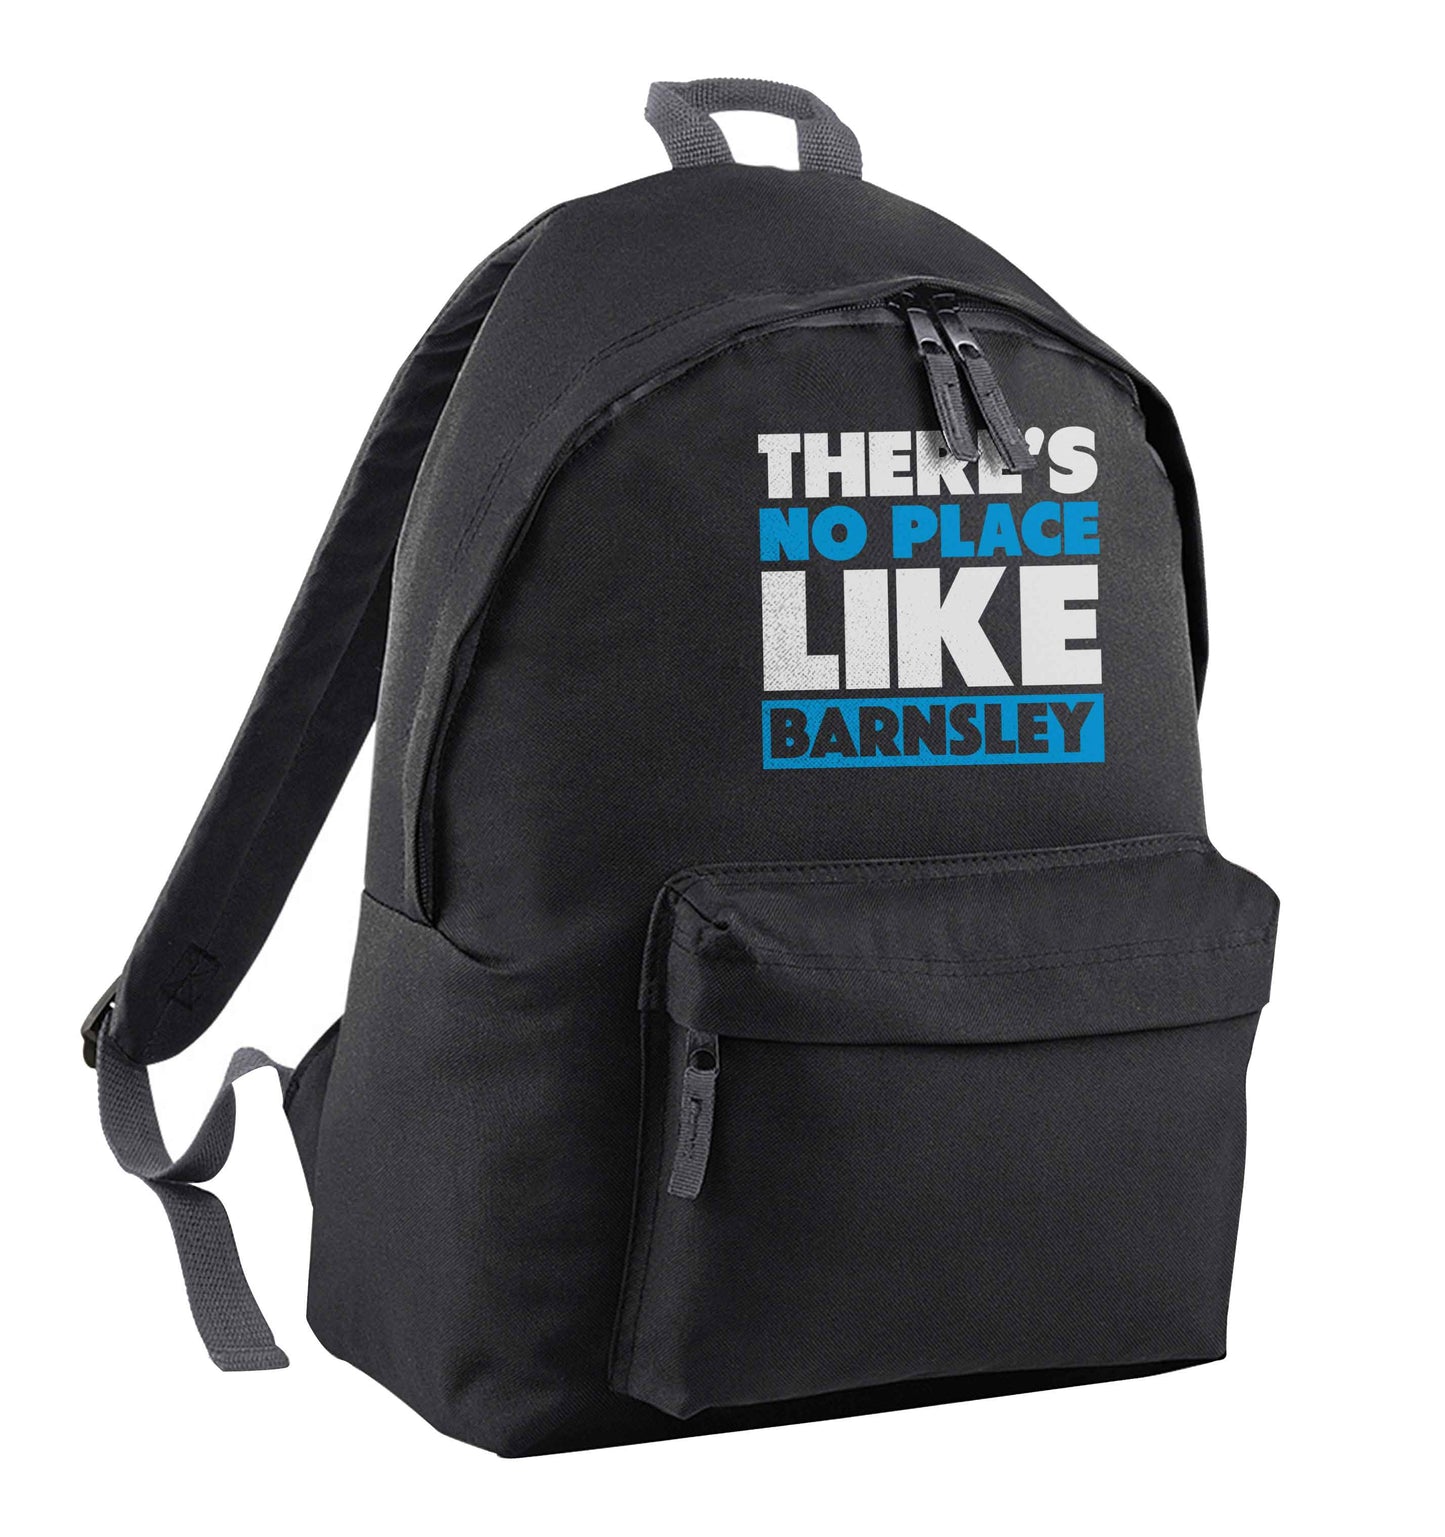 There's No Place Like Barnsley black children's backpack